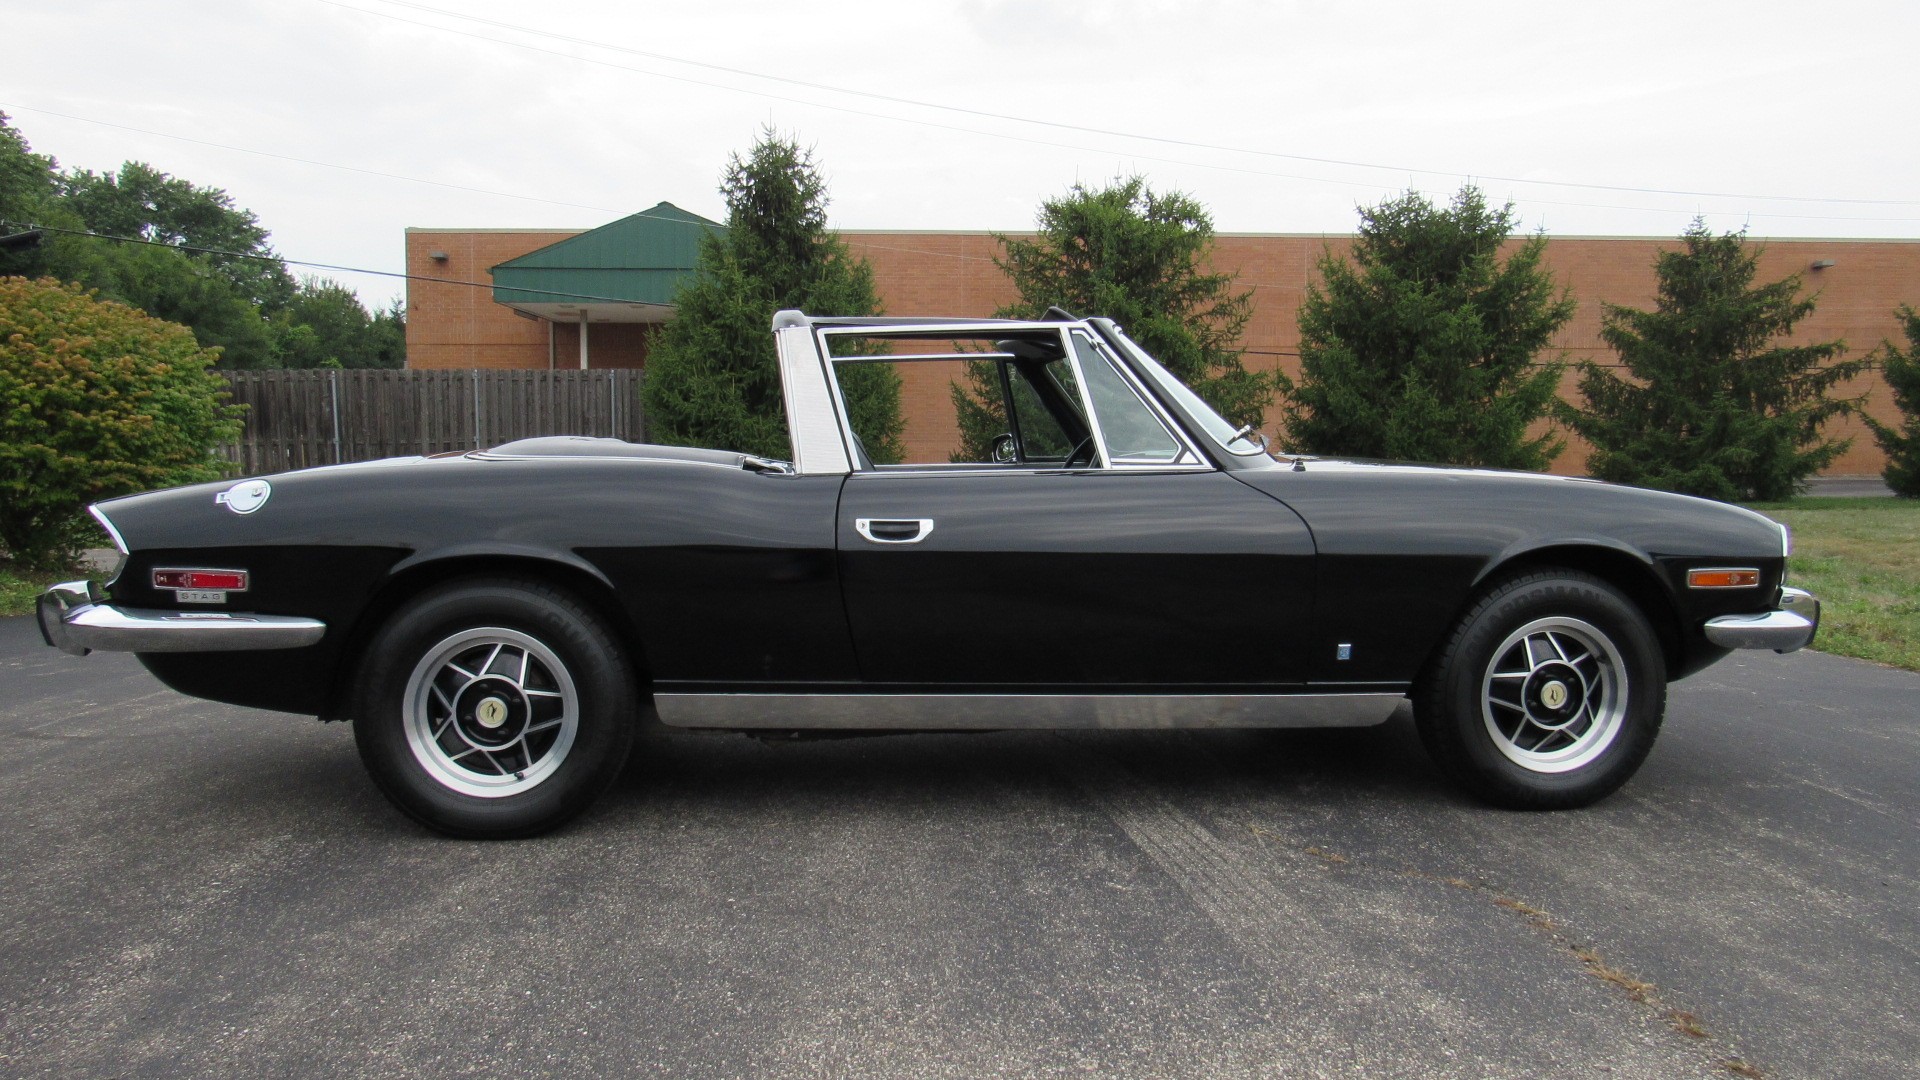 1973 Triumph Stag, Hardtop, Overdrive, SOLD!